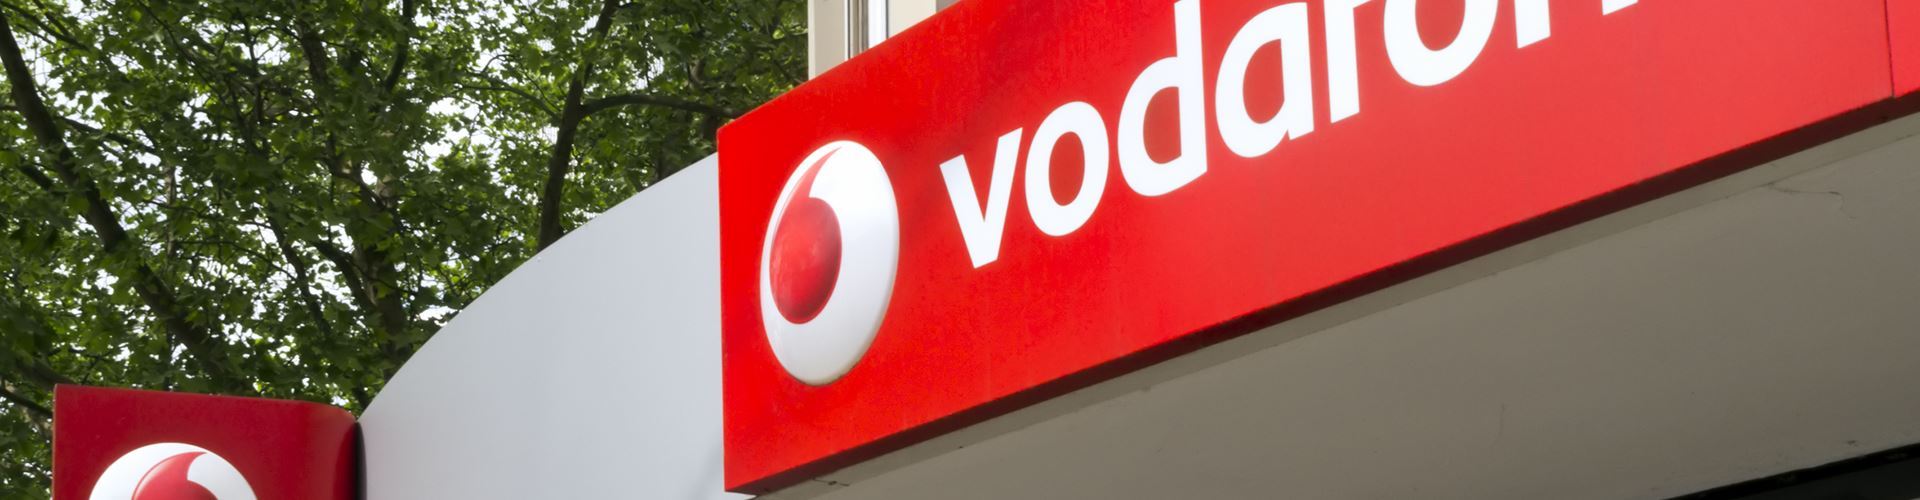 Vodafone to launch world’s largest programme to recruit women